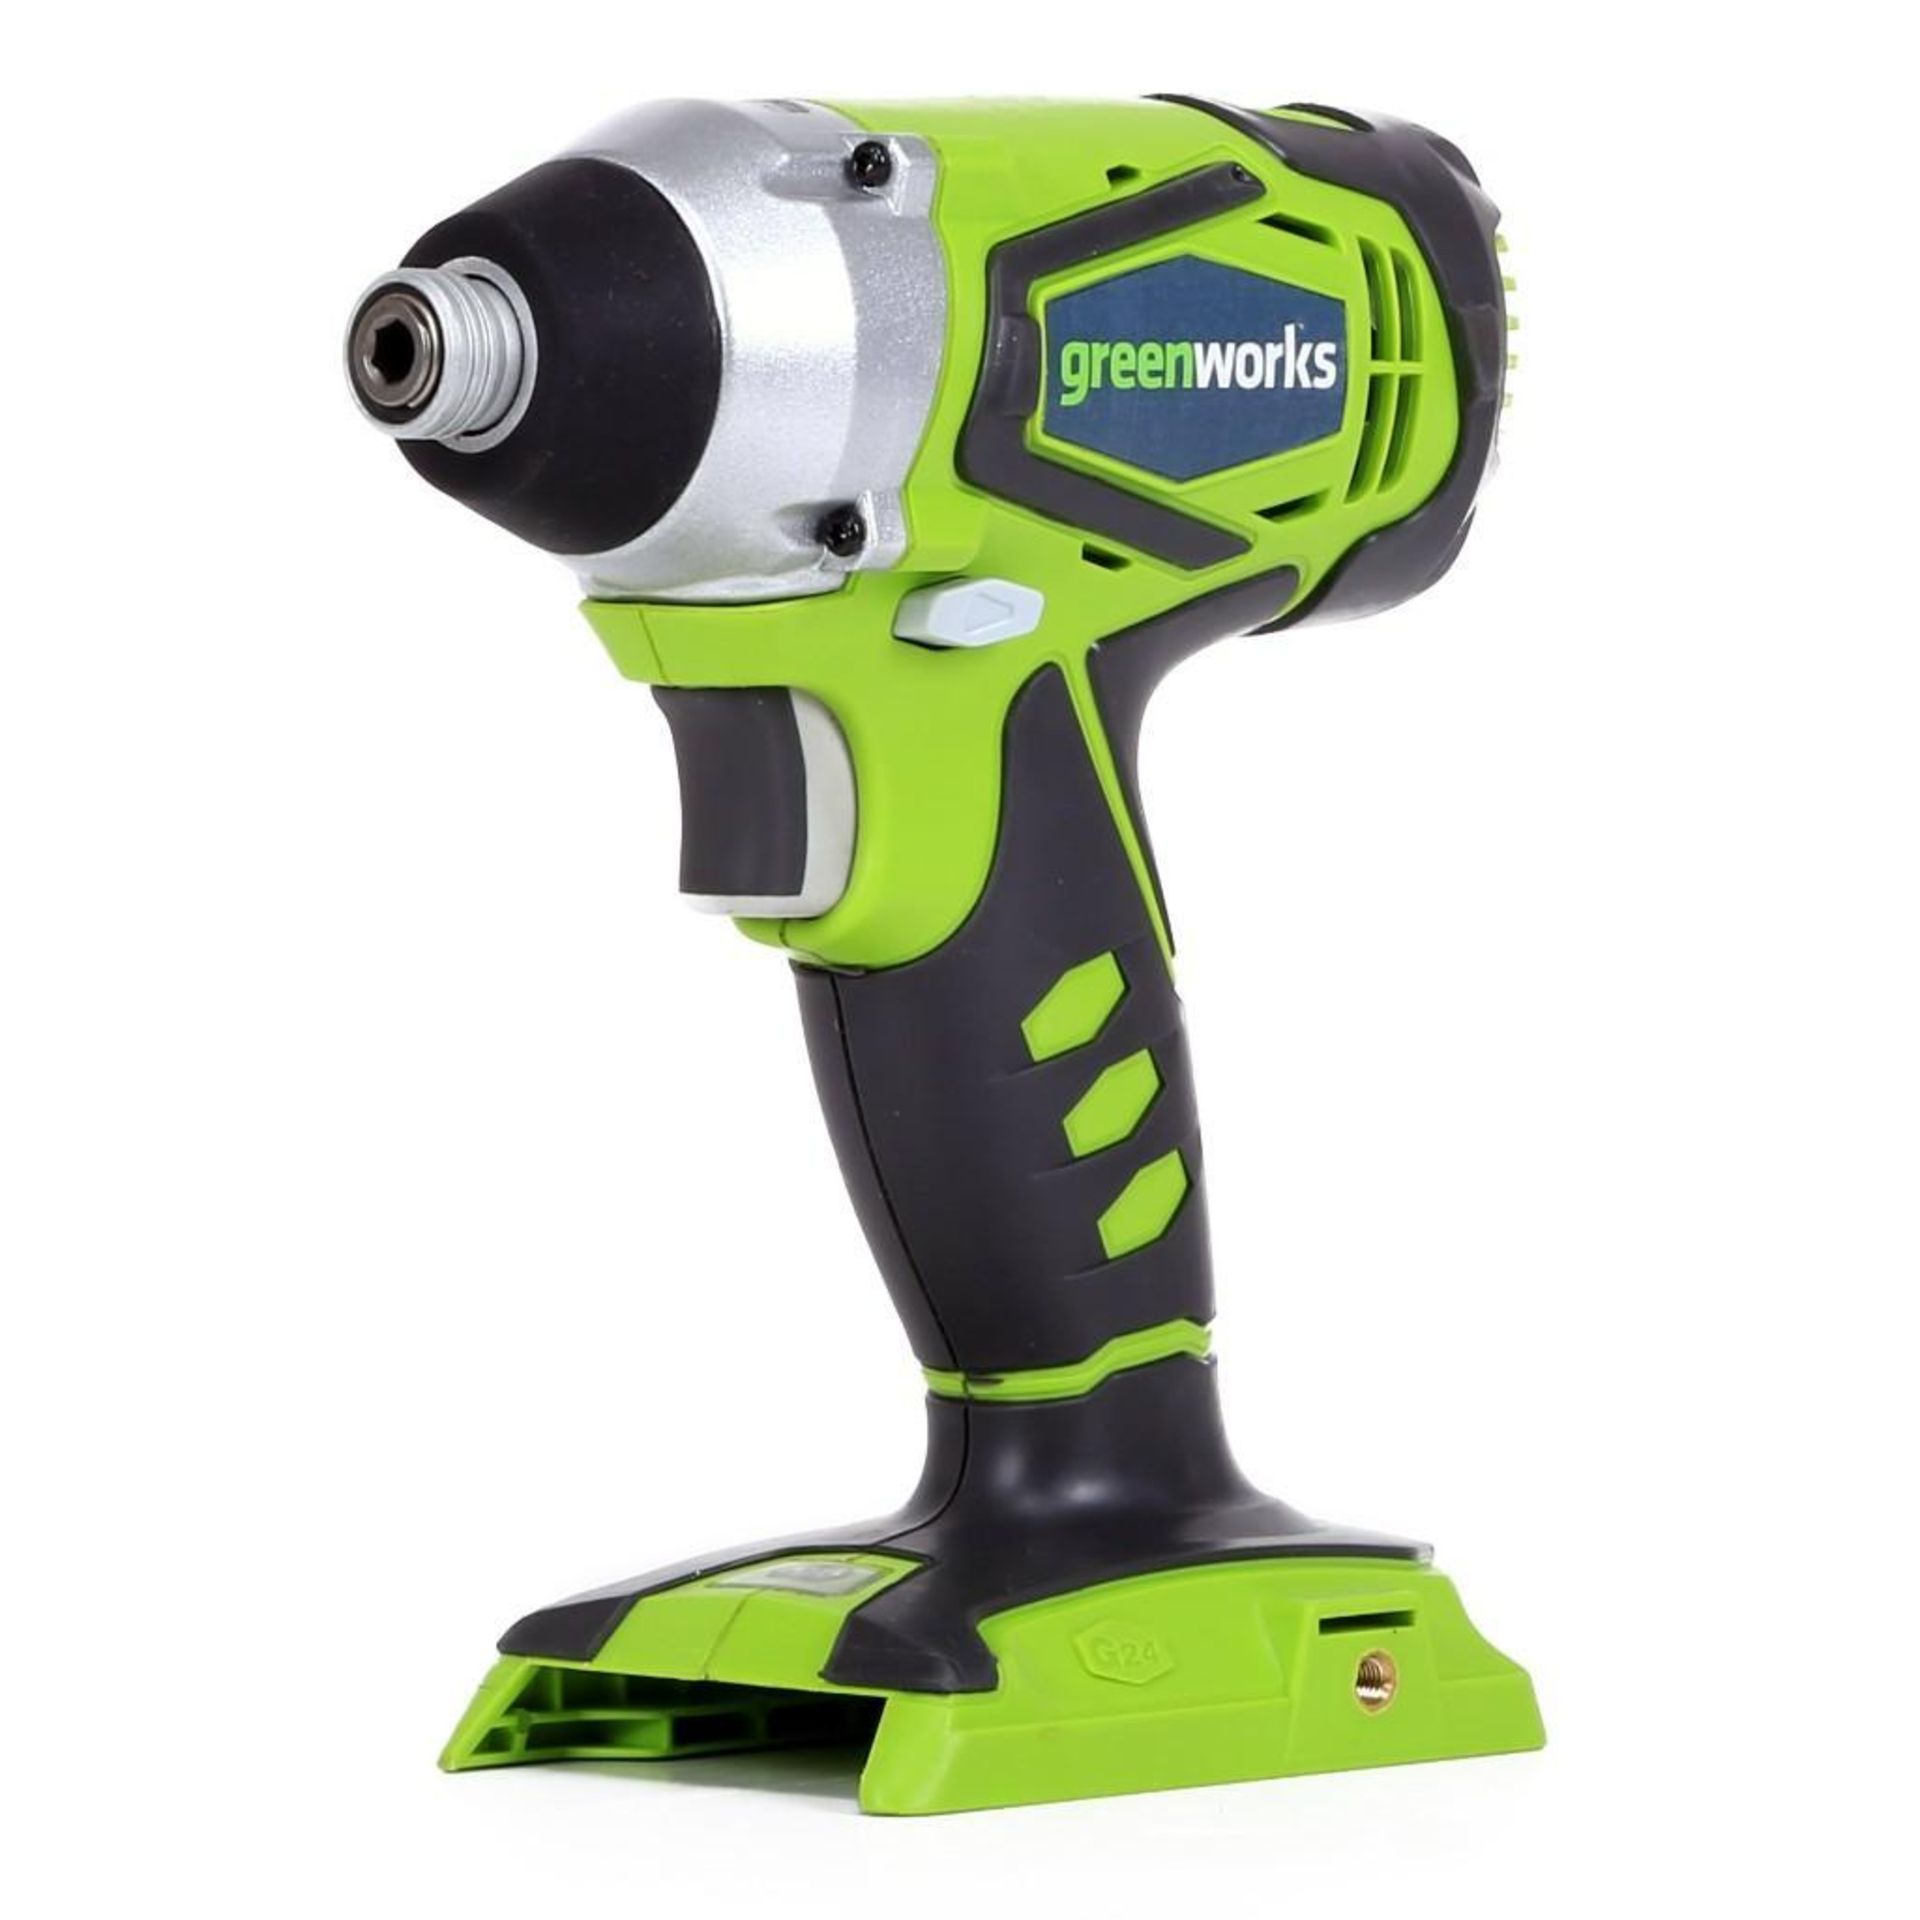 Greenworks 24V Cordless Impact Driver G24ID RRP £49.99